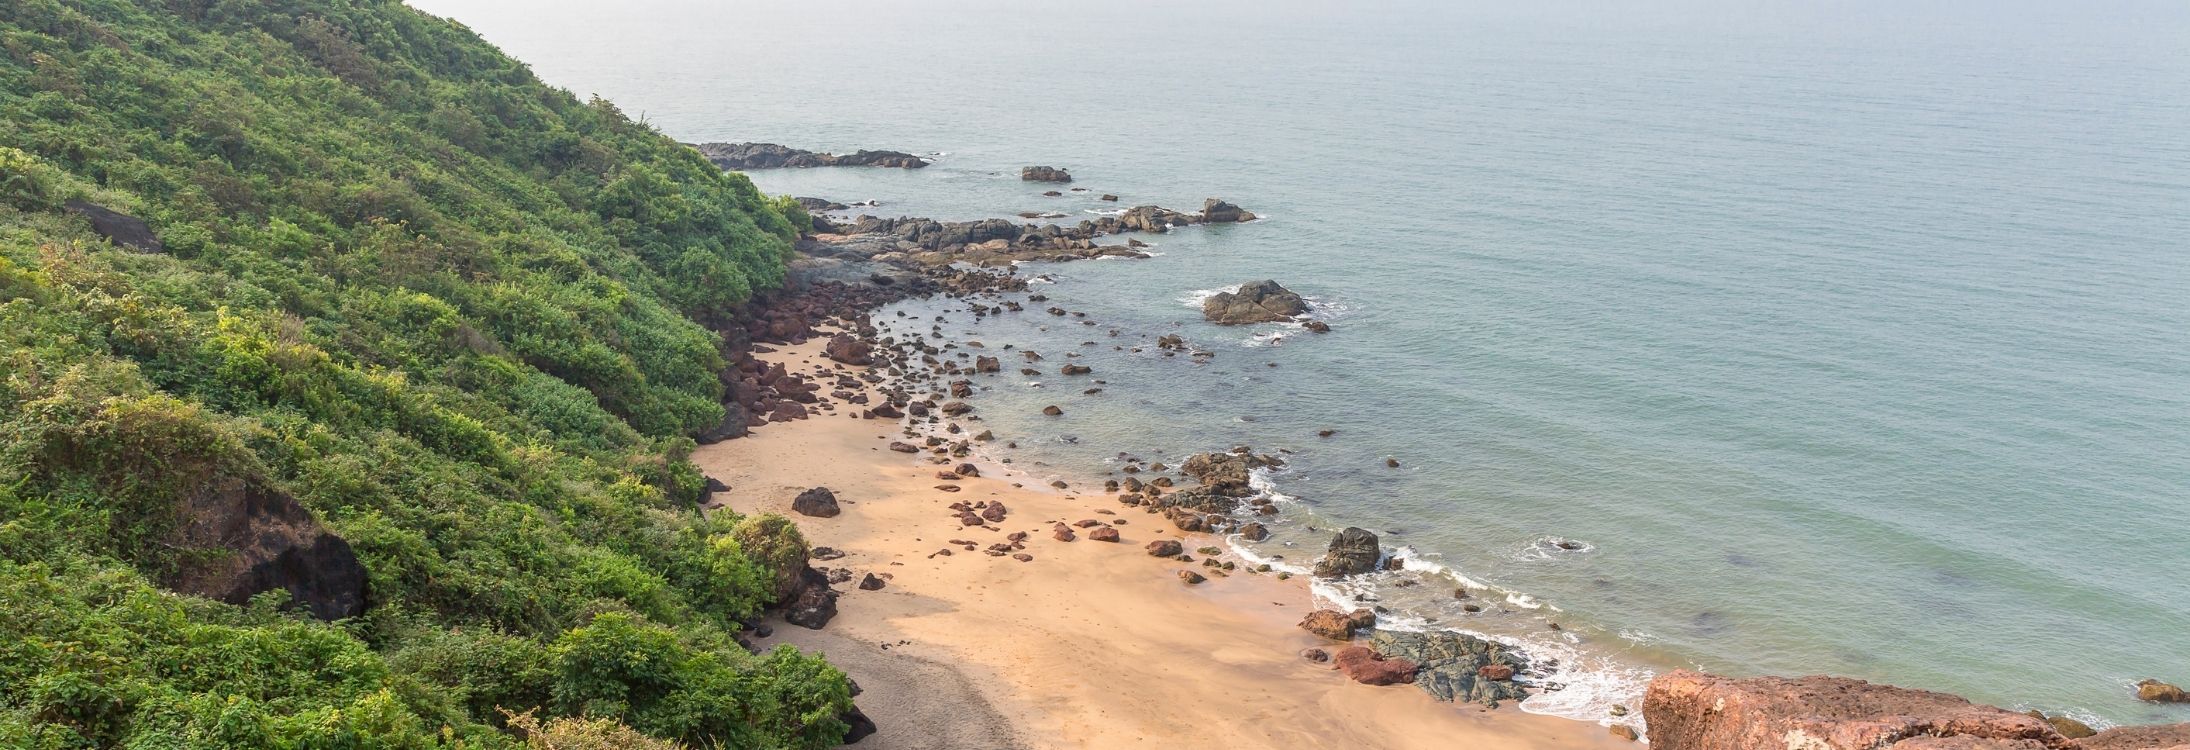 Beaches in Goa without a crowd